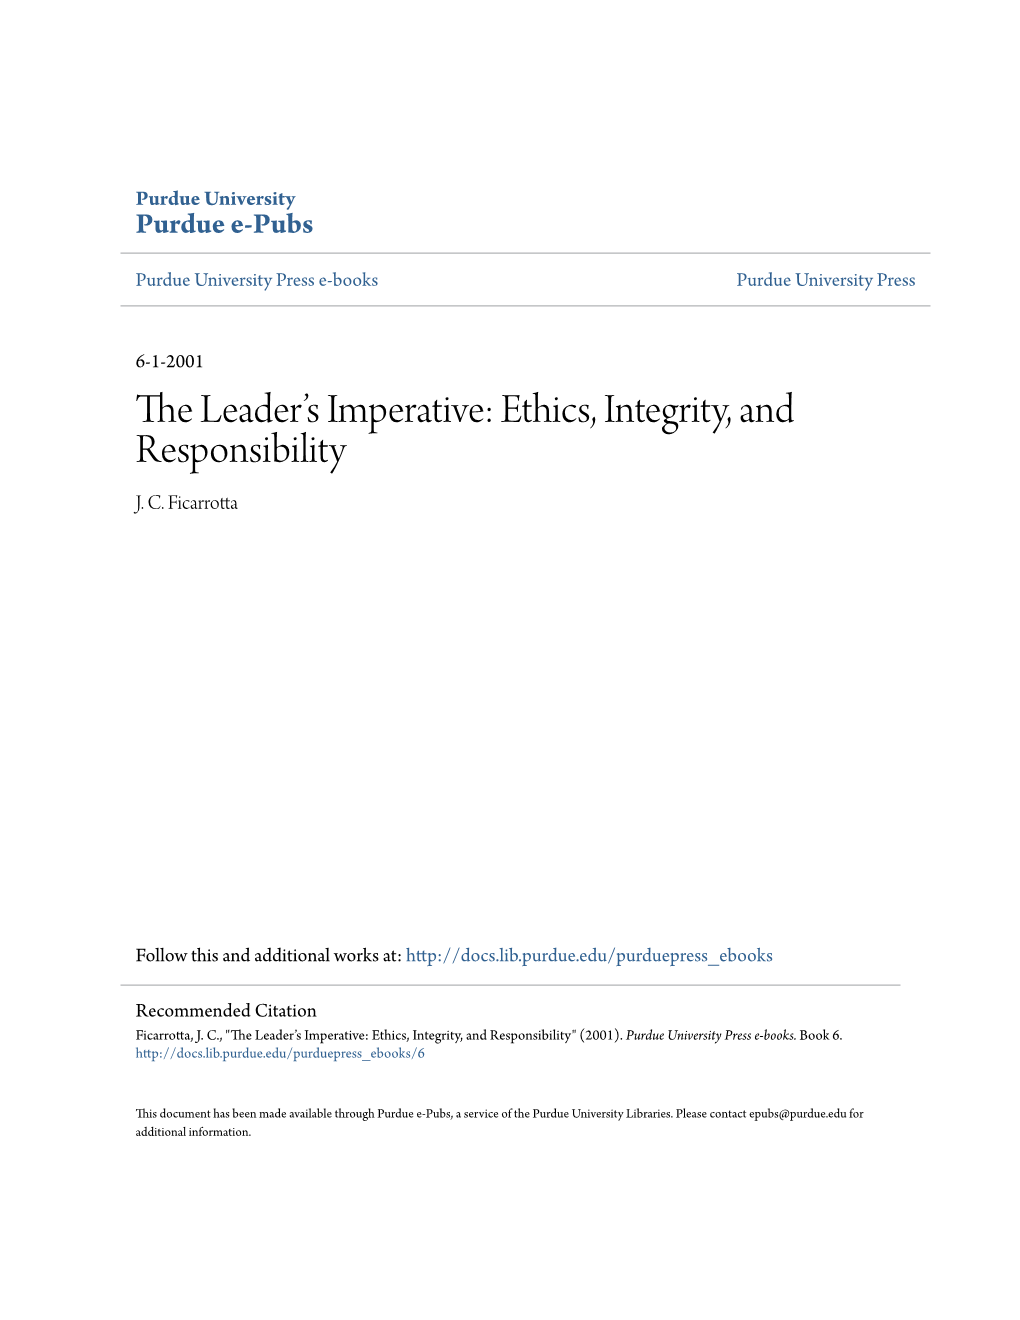 Ethics, Integrity, and Responsibility J